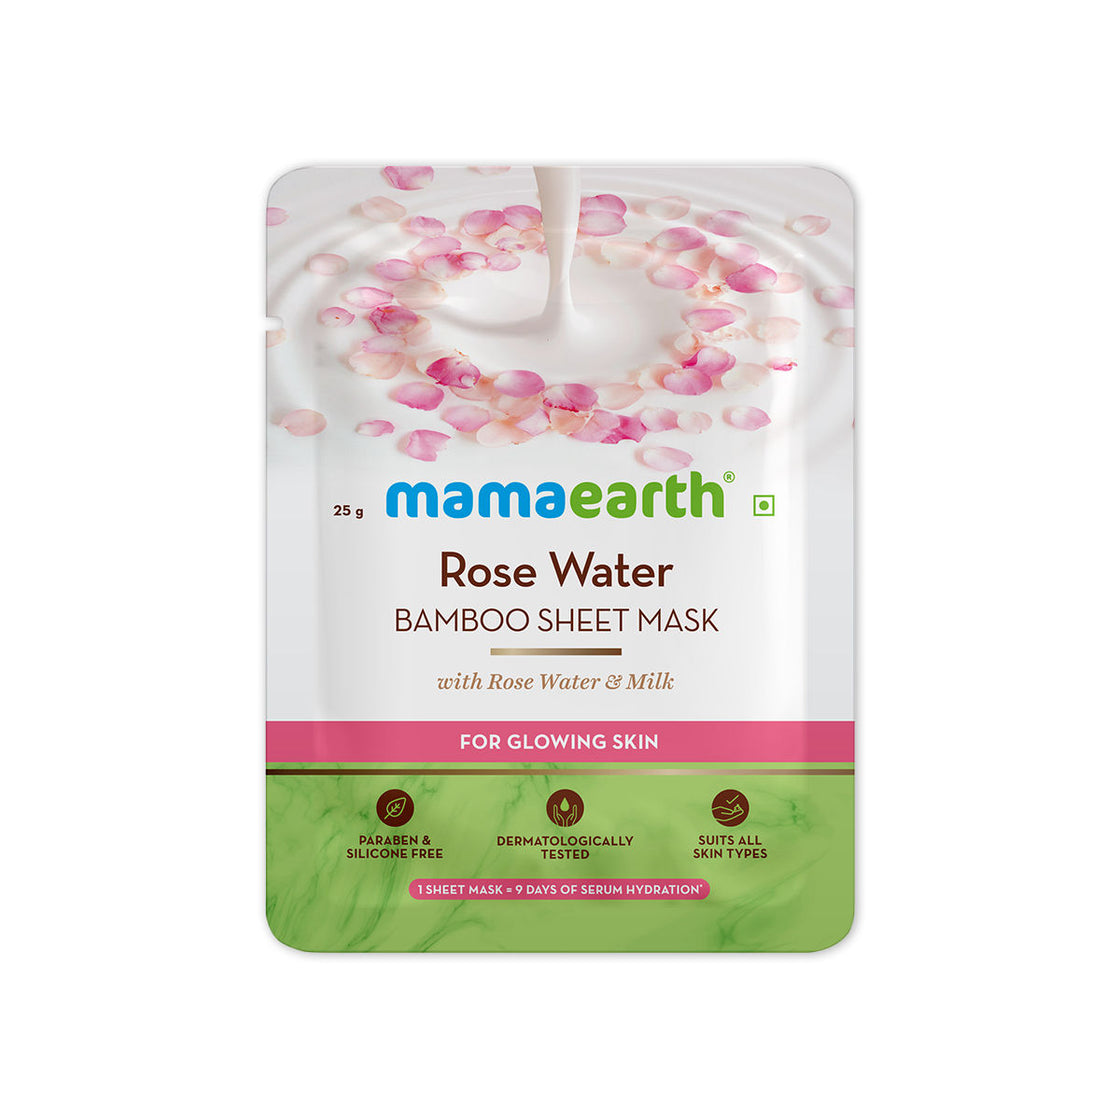 Mamaearth Rose Water Bamboo Sheet Mask With Rose Water & Milk For Glowing Skin-8